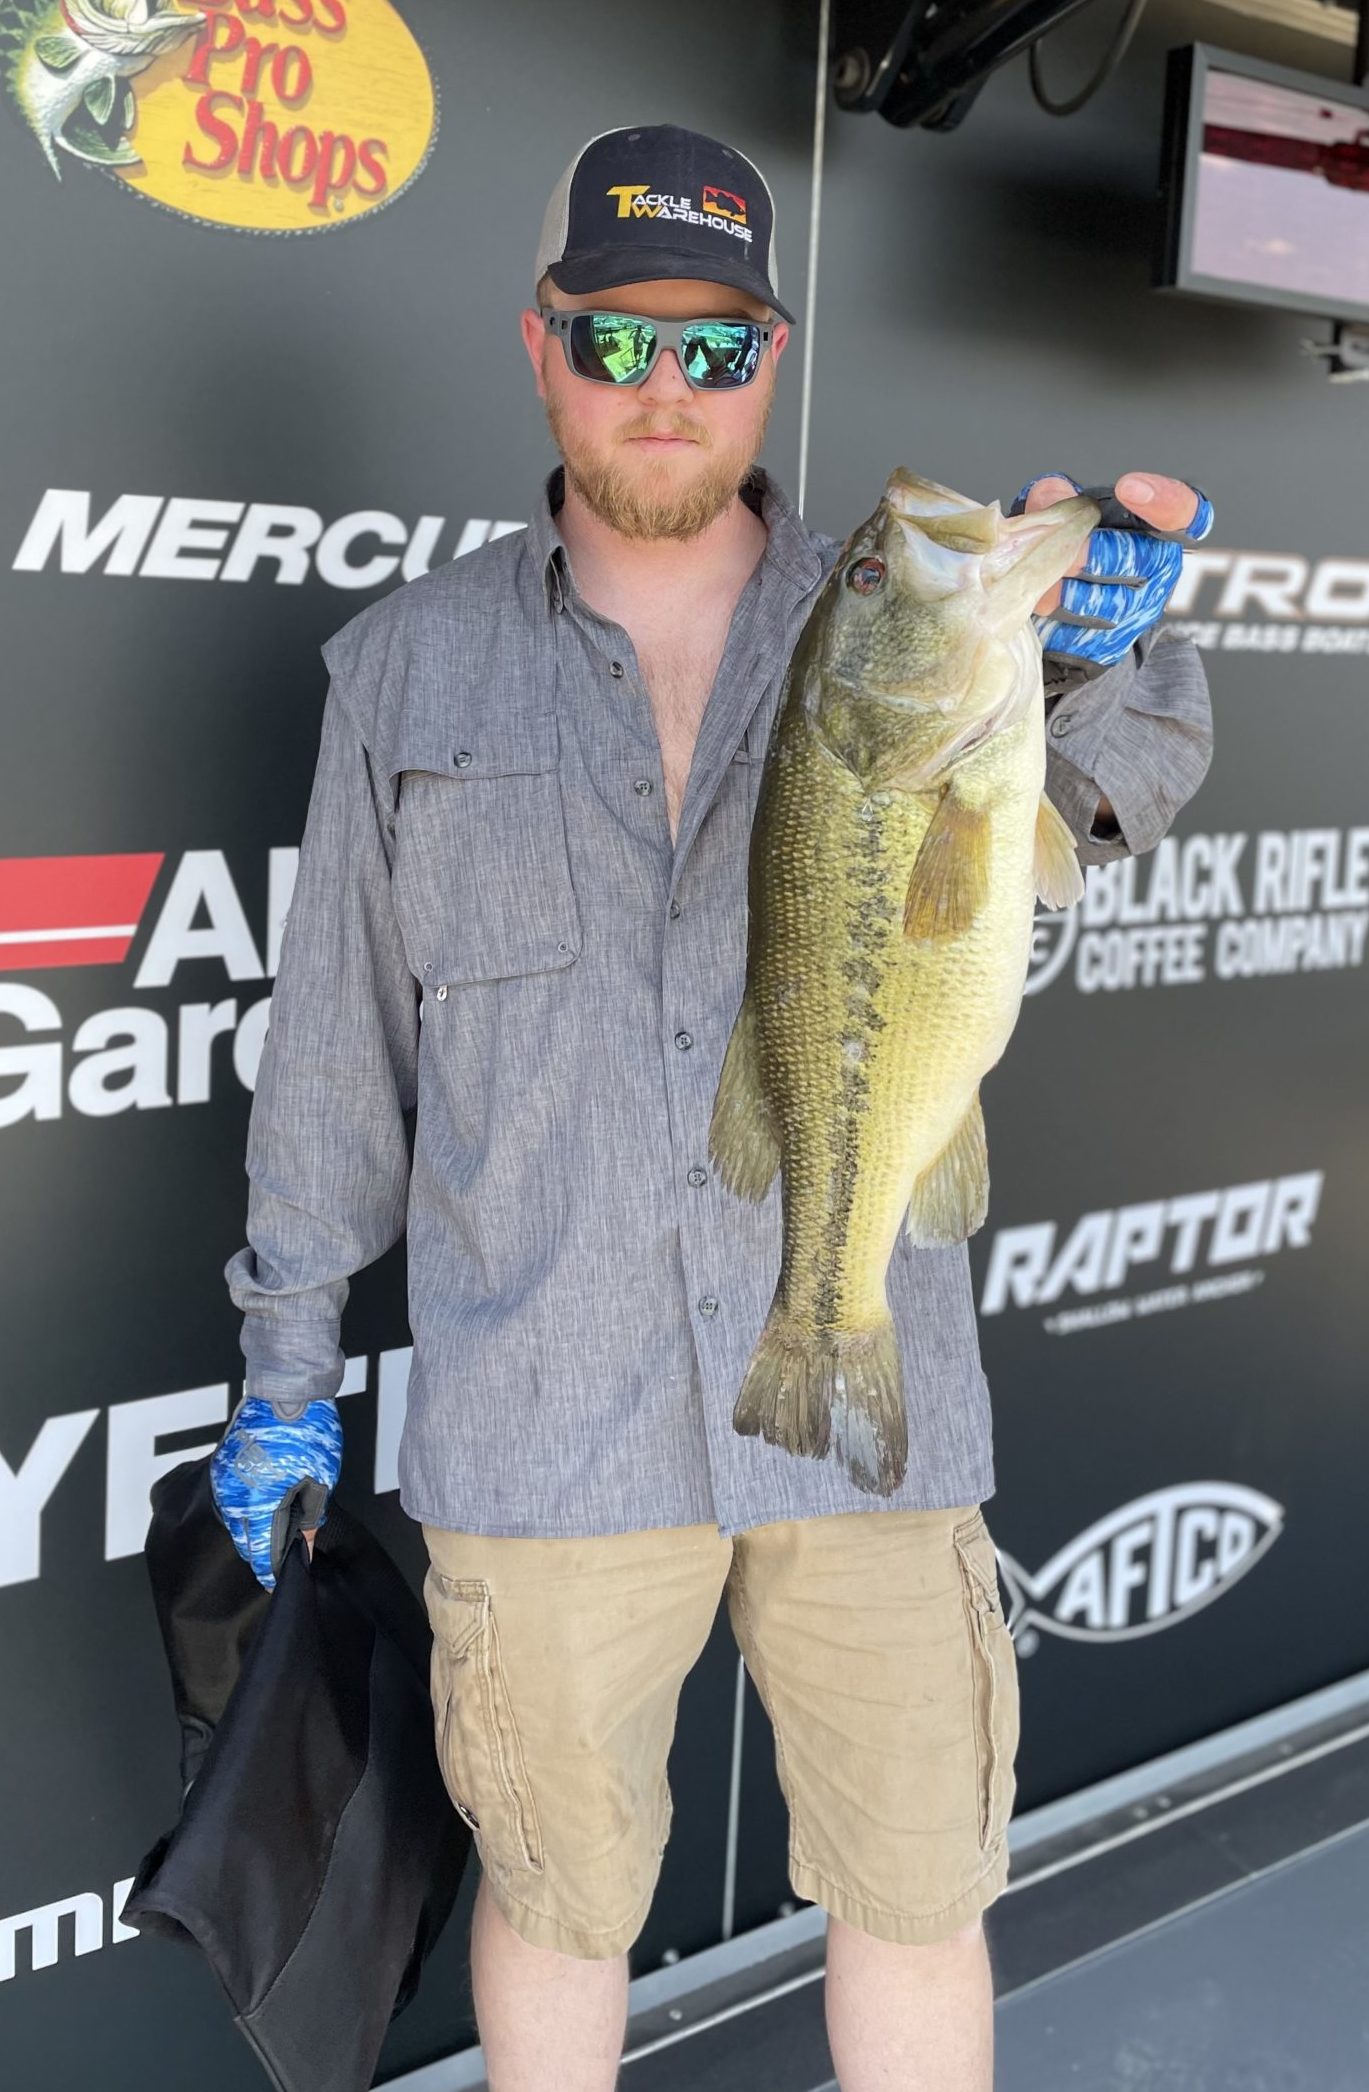 Robert Elliston Wins Hour Five with a 6.06 on Day 2 at the Big Bass Tour on SML